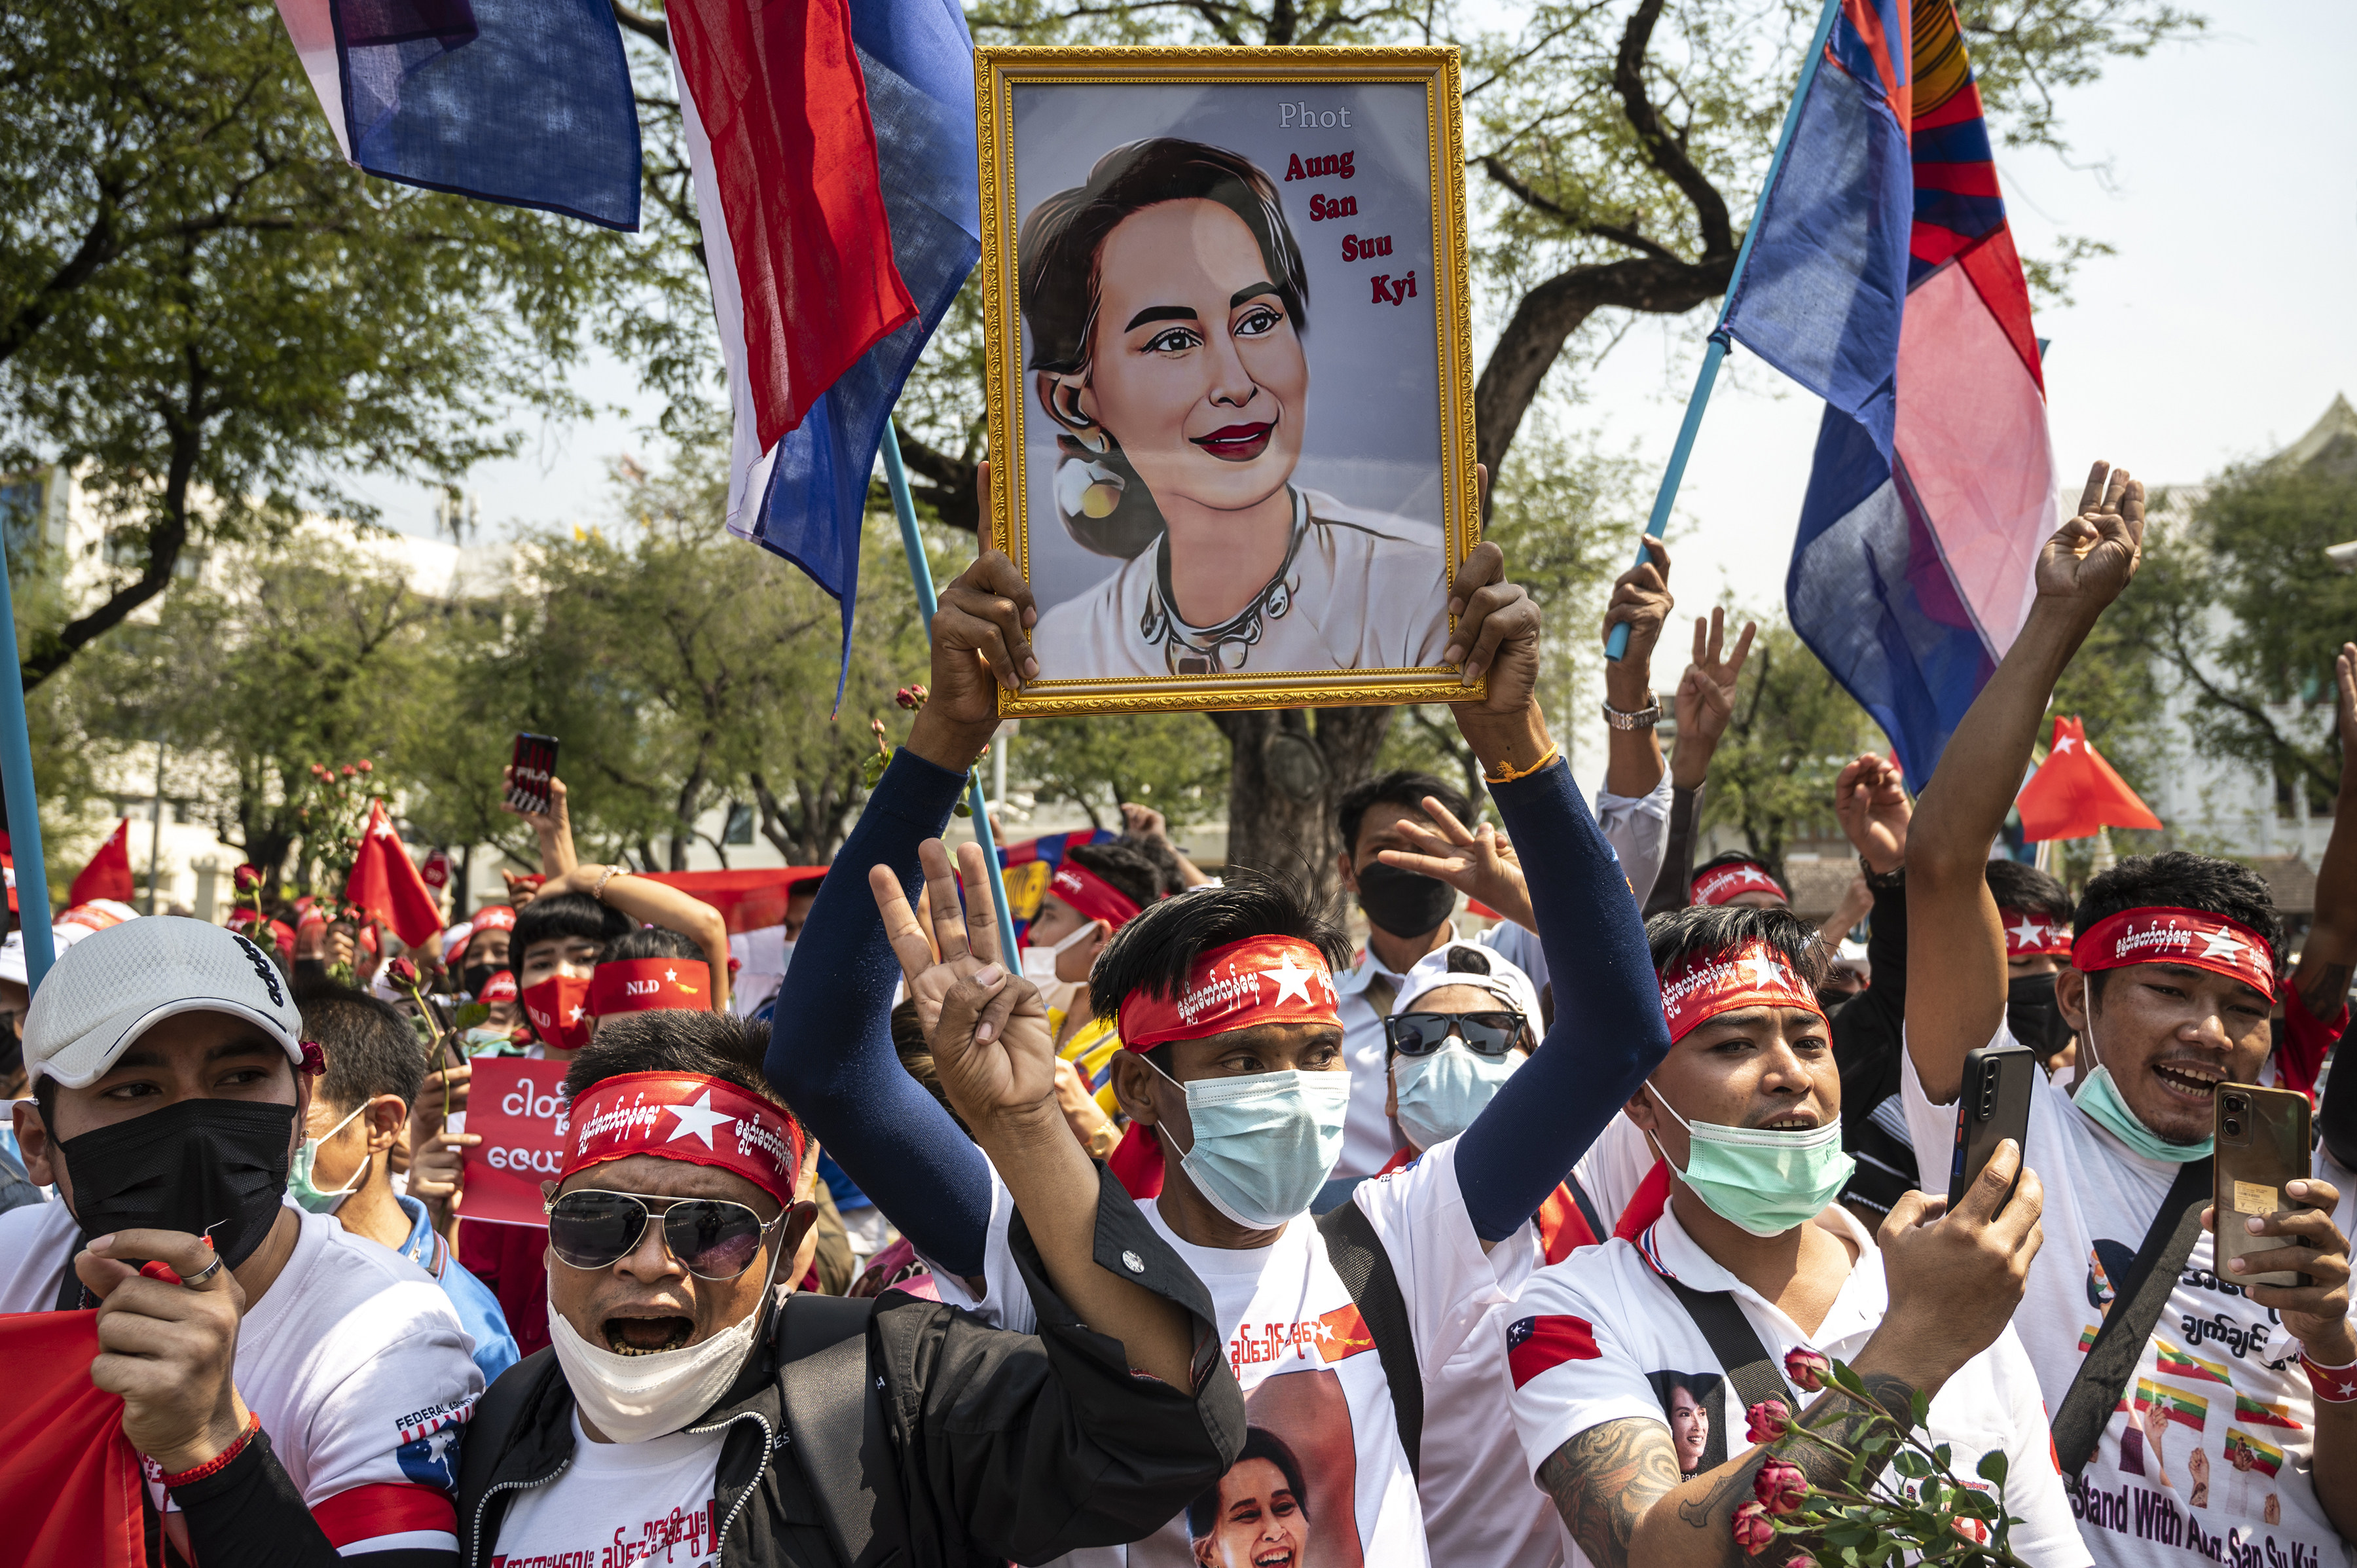 Myanmar activists hold up portraits of Aung San Suu Kyi at an anti-junta demonstration in front of the United Nations building in Bangkok, Thailand. Photo: Getty Images/TNS